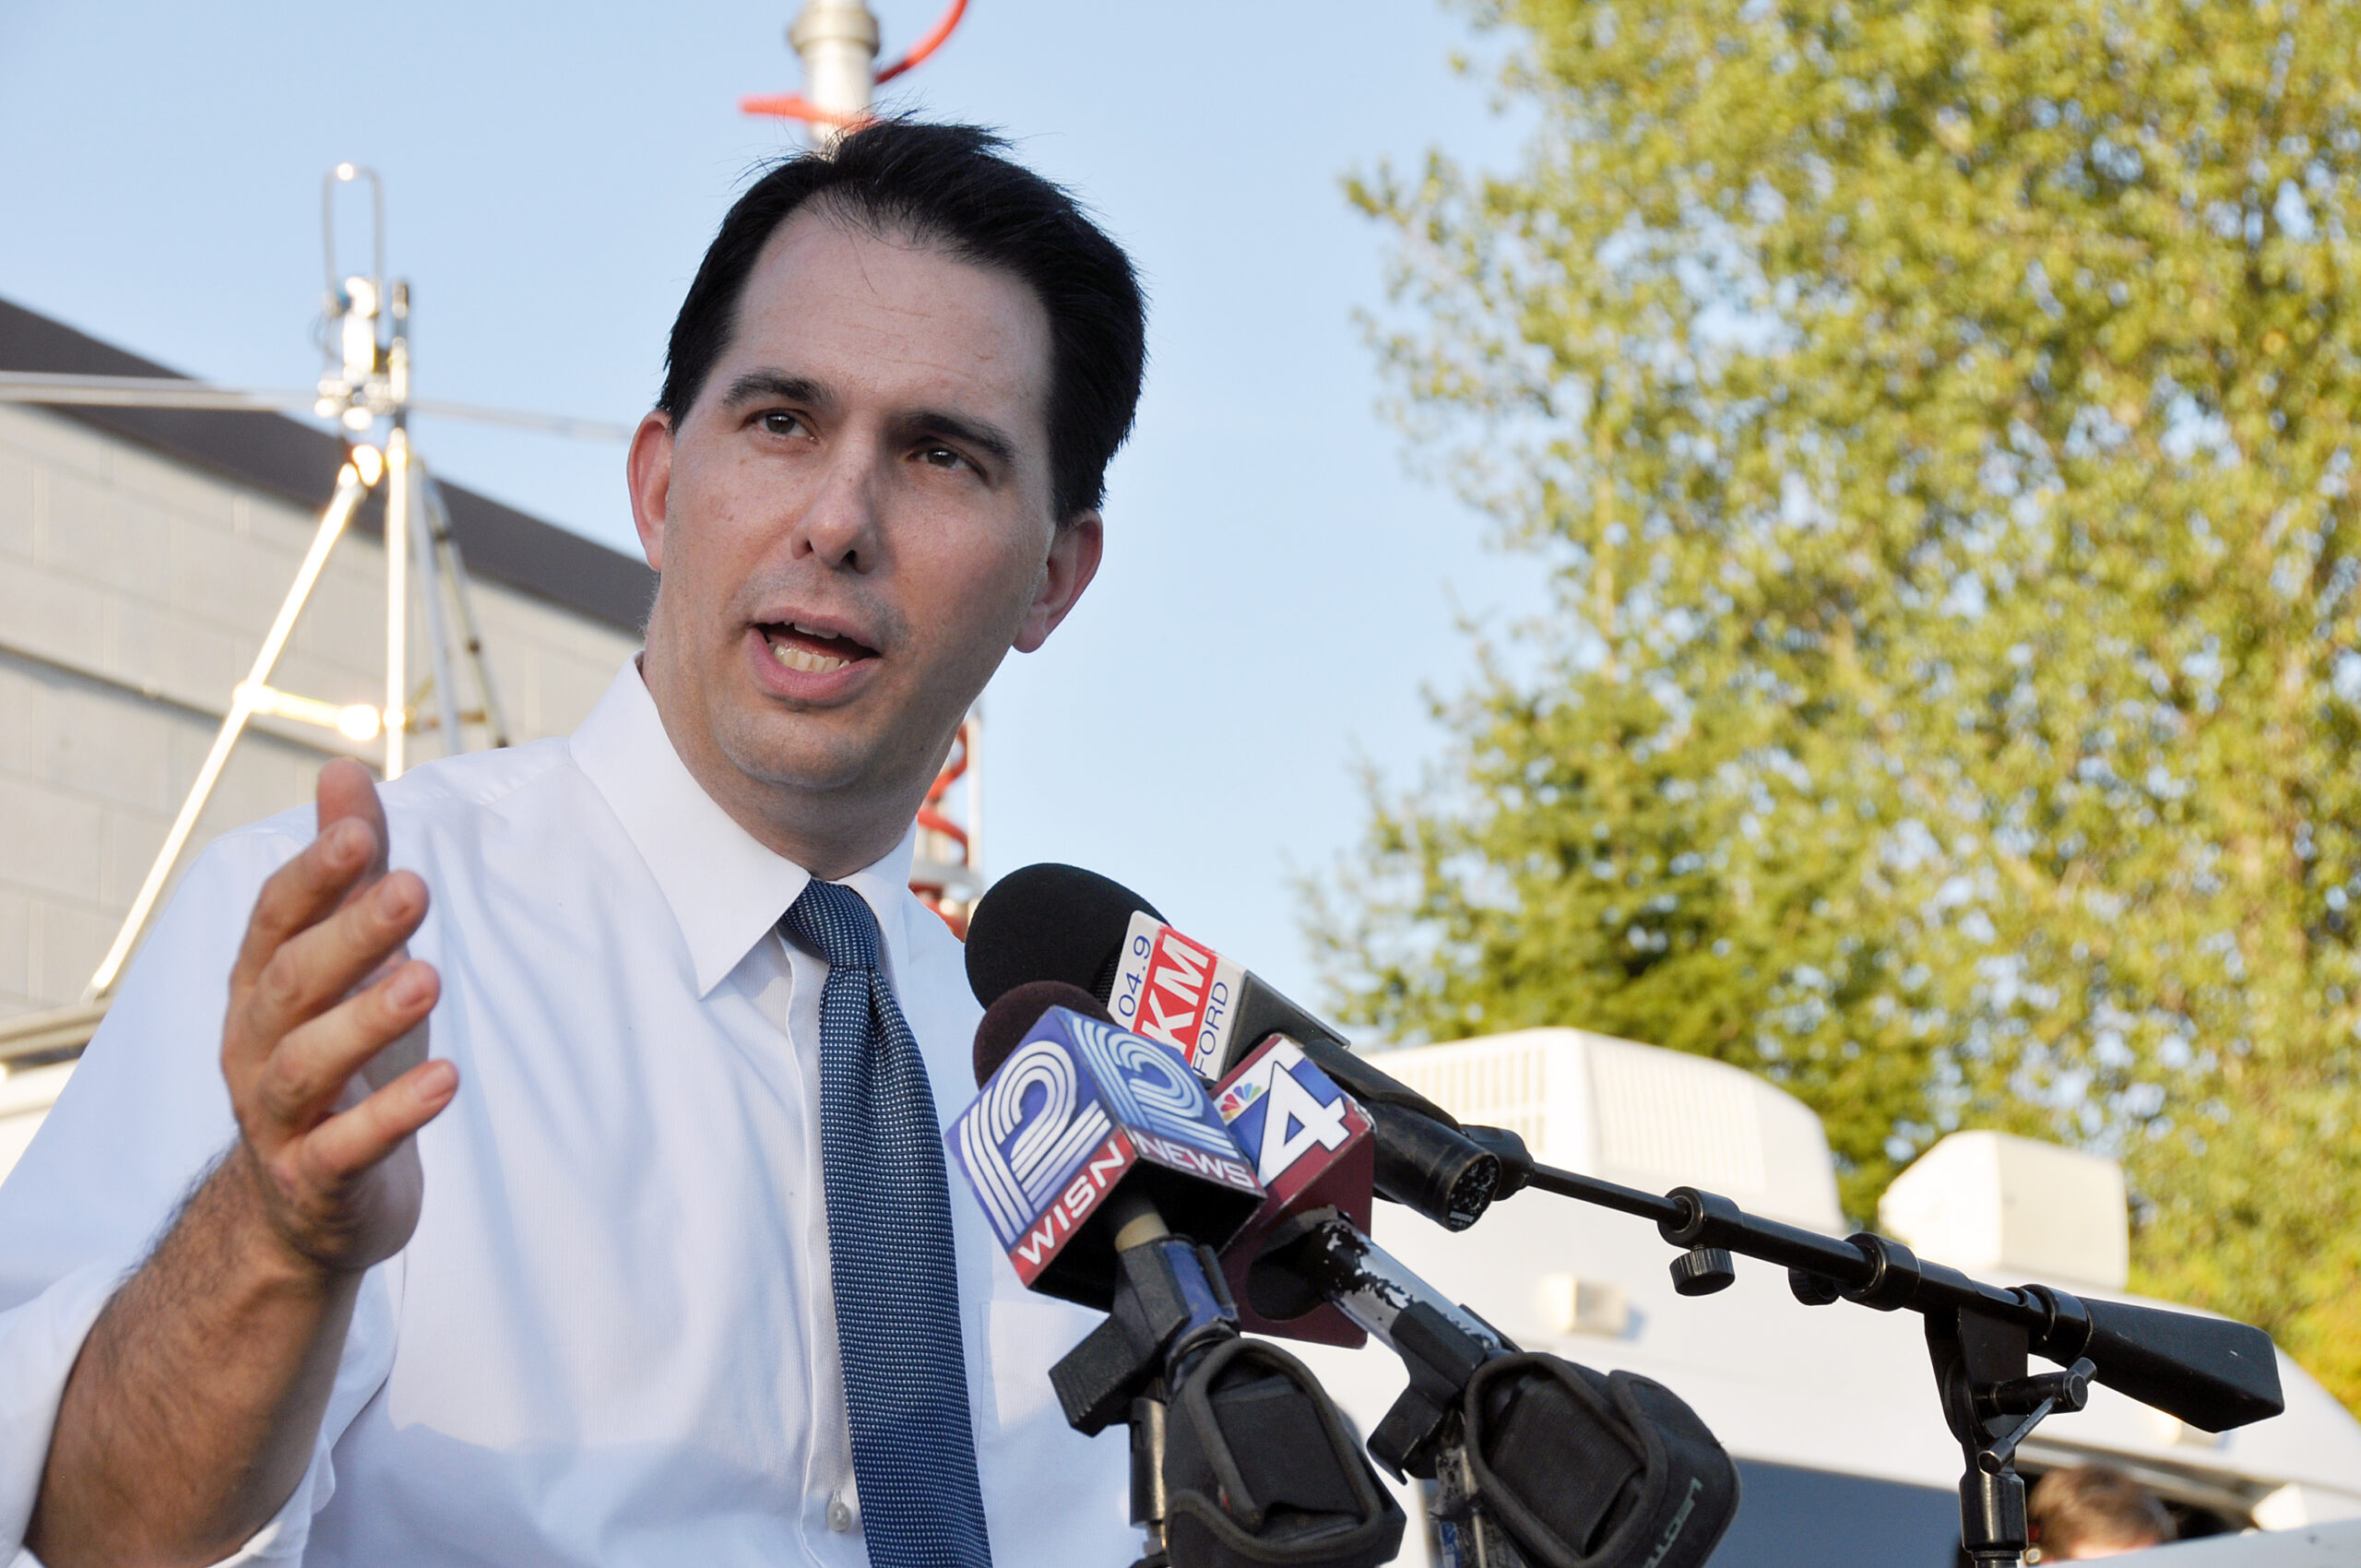 Walker Champions His Record On Veterans’ Issues